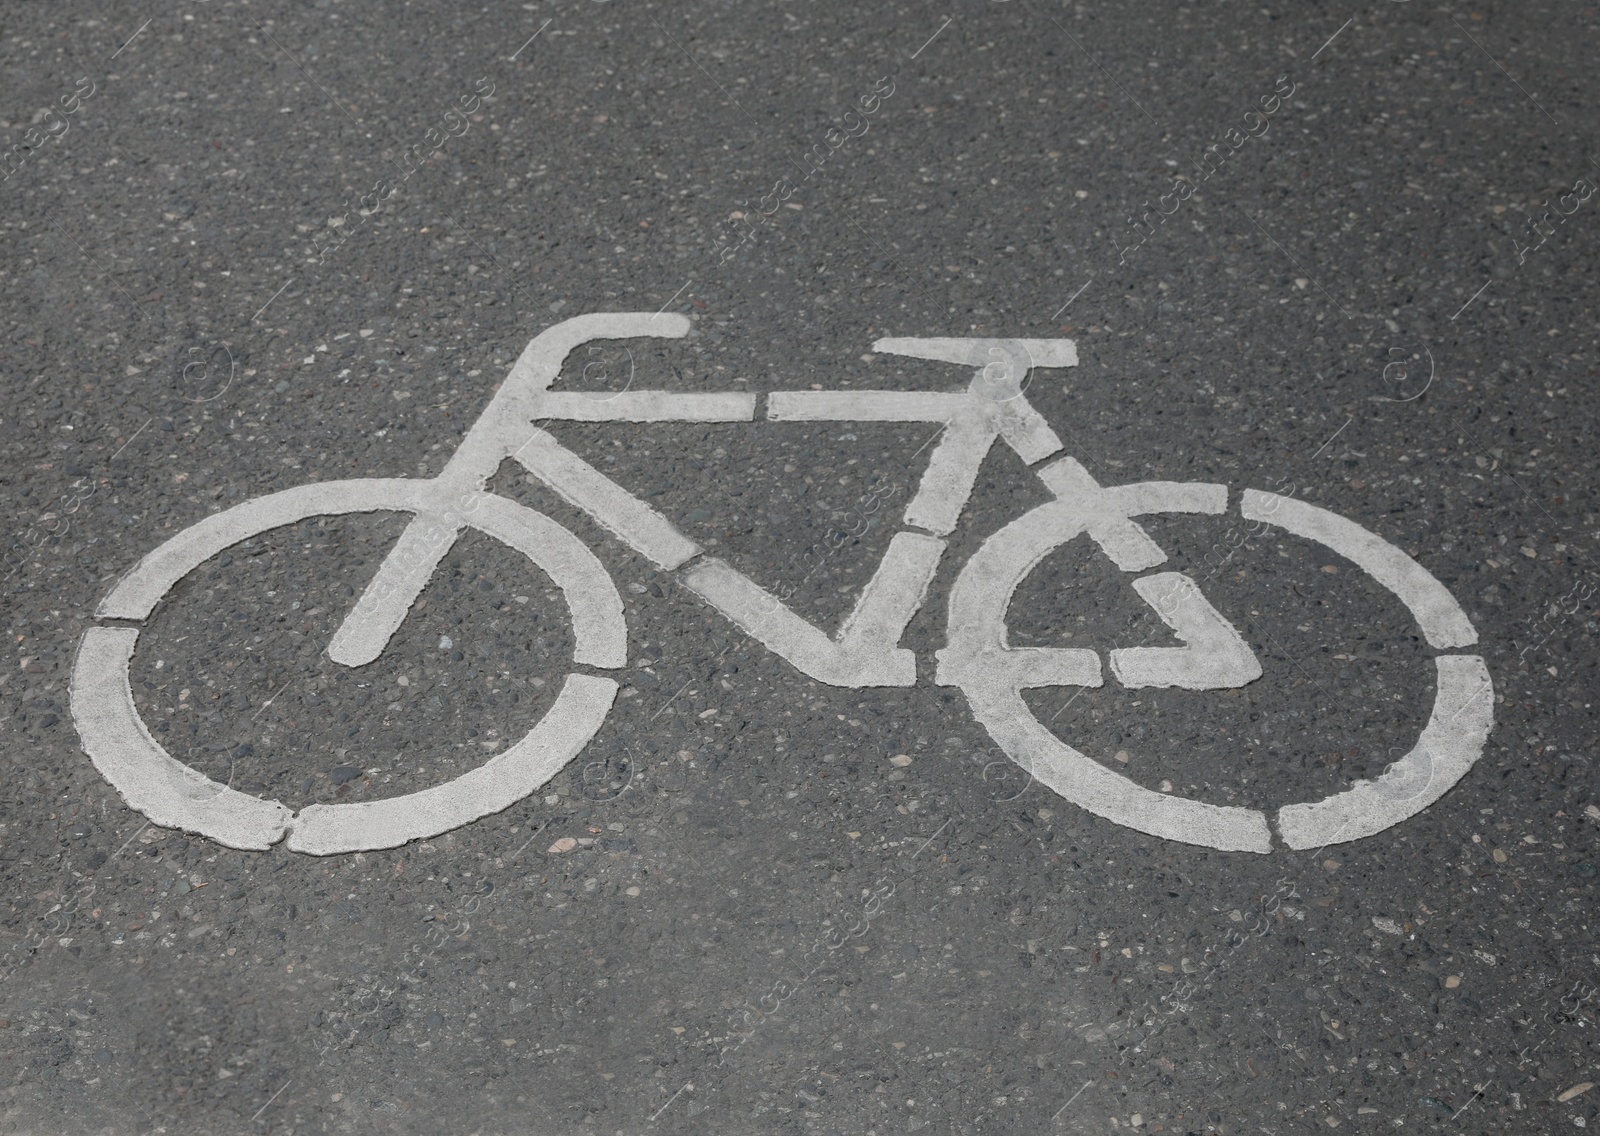 Photo of Bicycle lane with white sign painted on asphalt